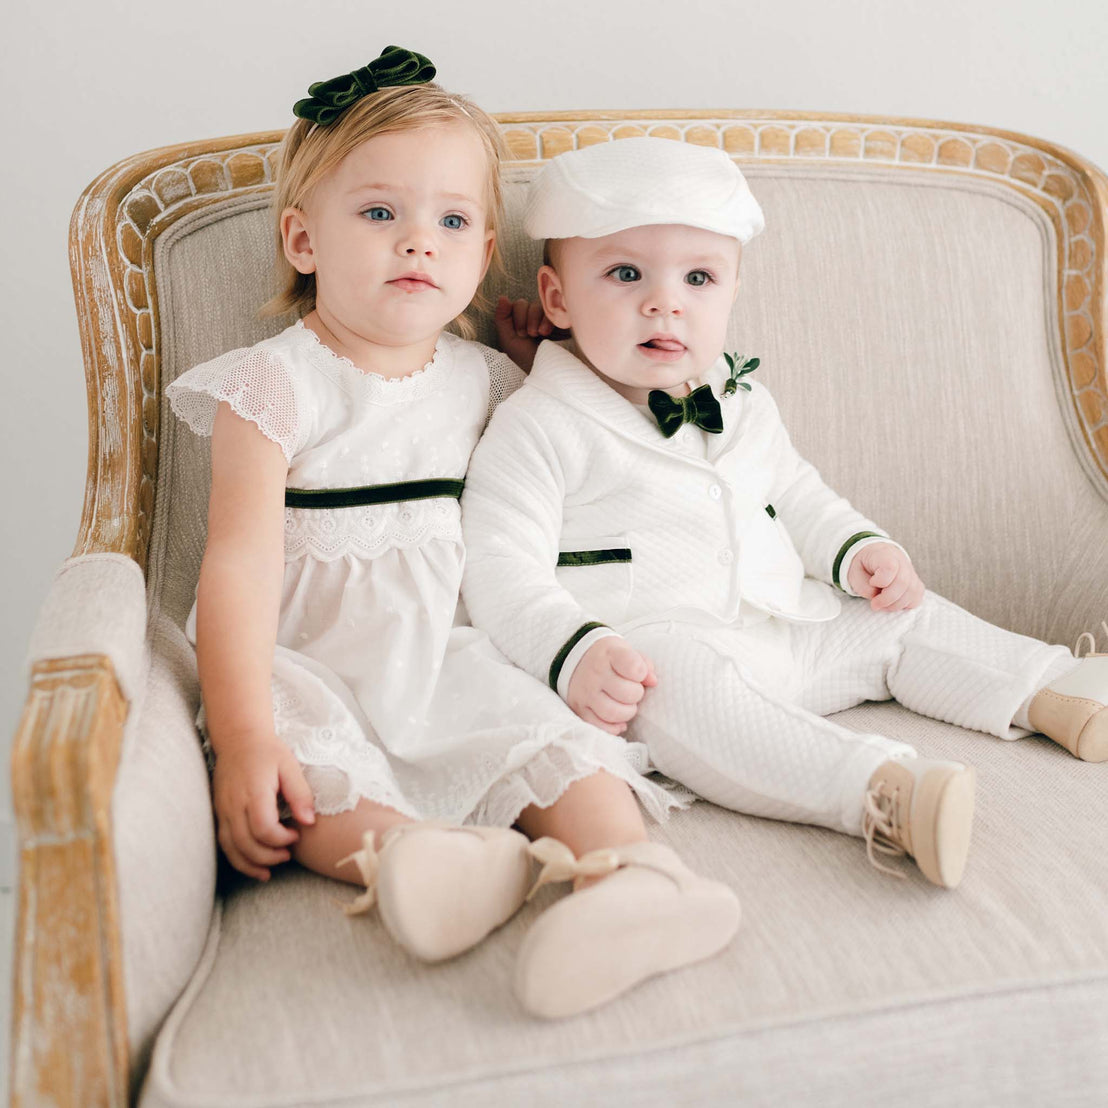 A toddler girl and a baby boy dressed in formal white outfits, sitting together on a beige sofa for their christening. The girl has a green headband, and the boy sports a Noah 3-Piece Suit | Green Trim.